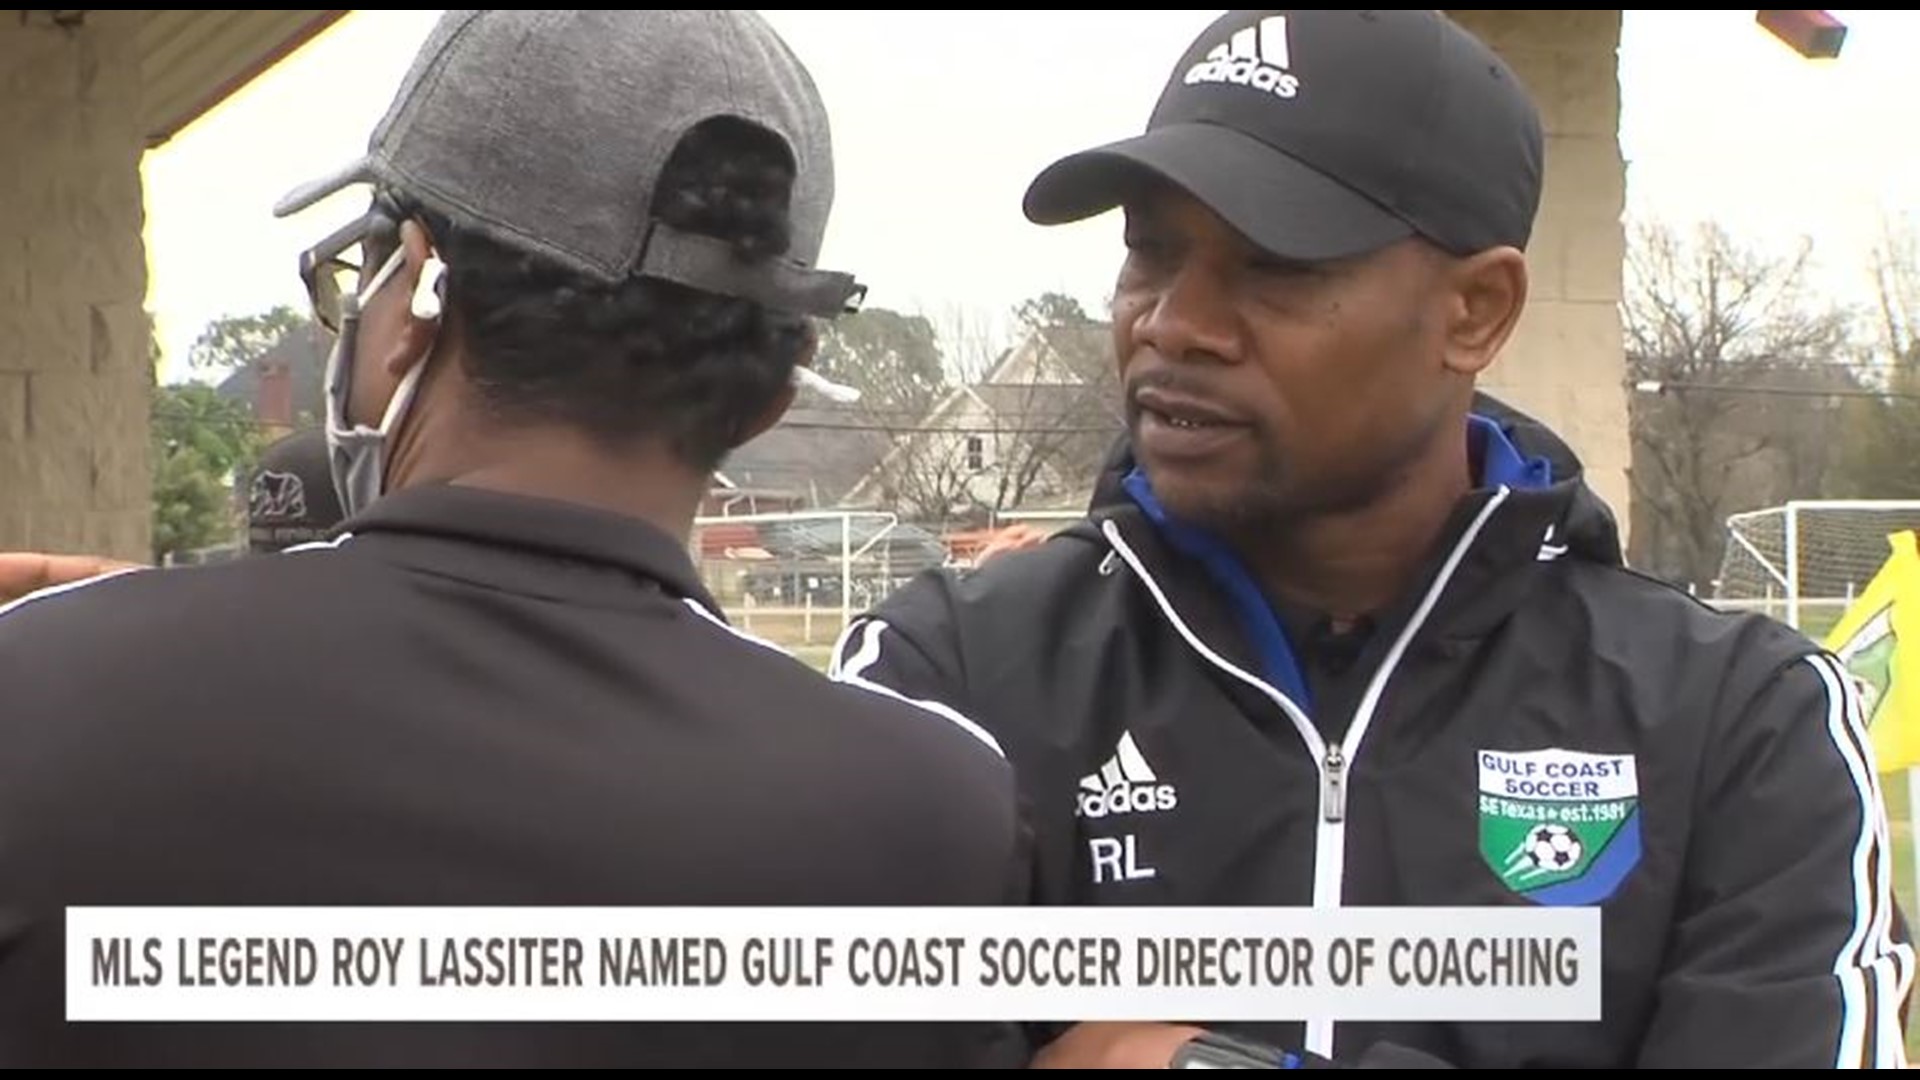 Before joining Gulf Coast, Lassiter was the Technical Director of Washington Premier FC